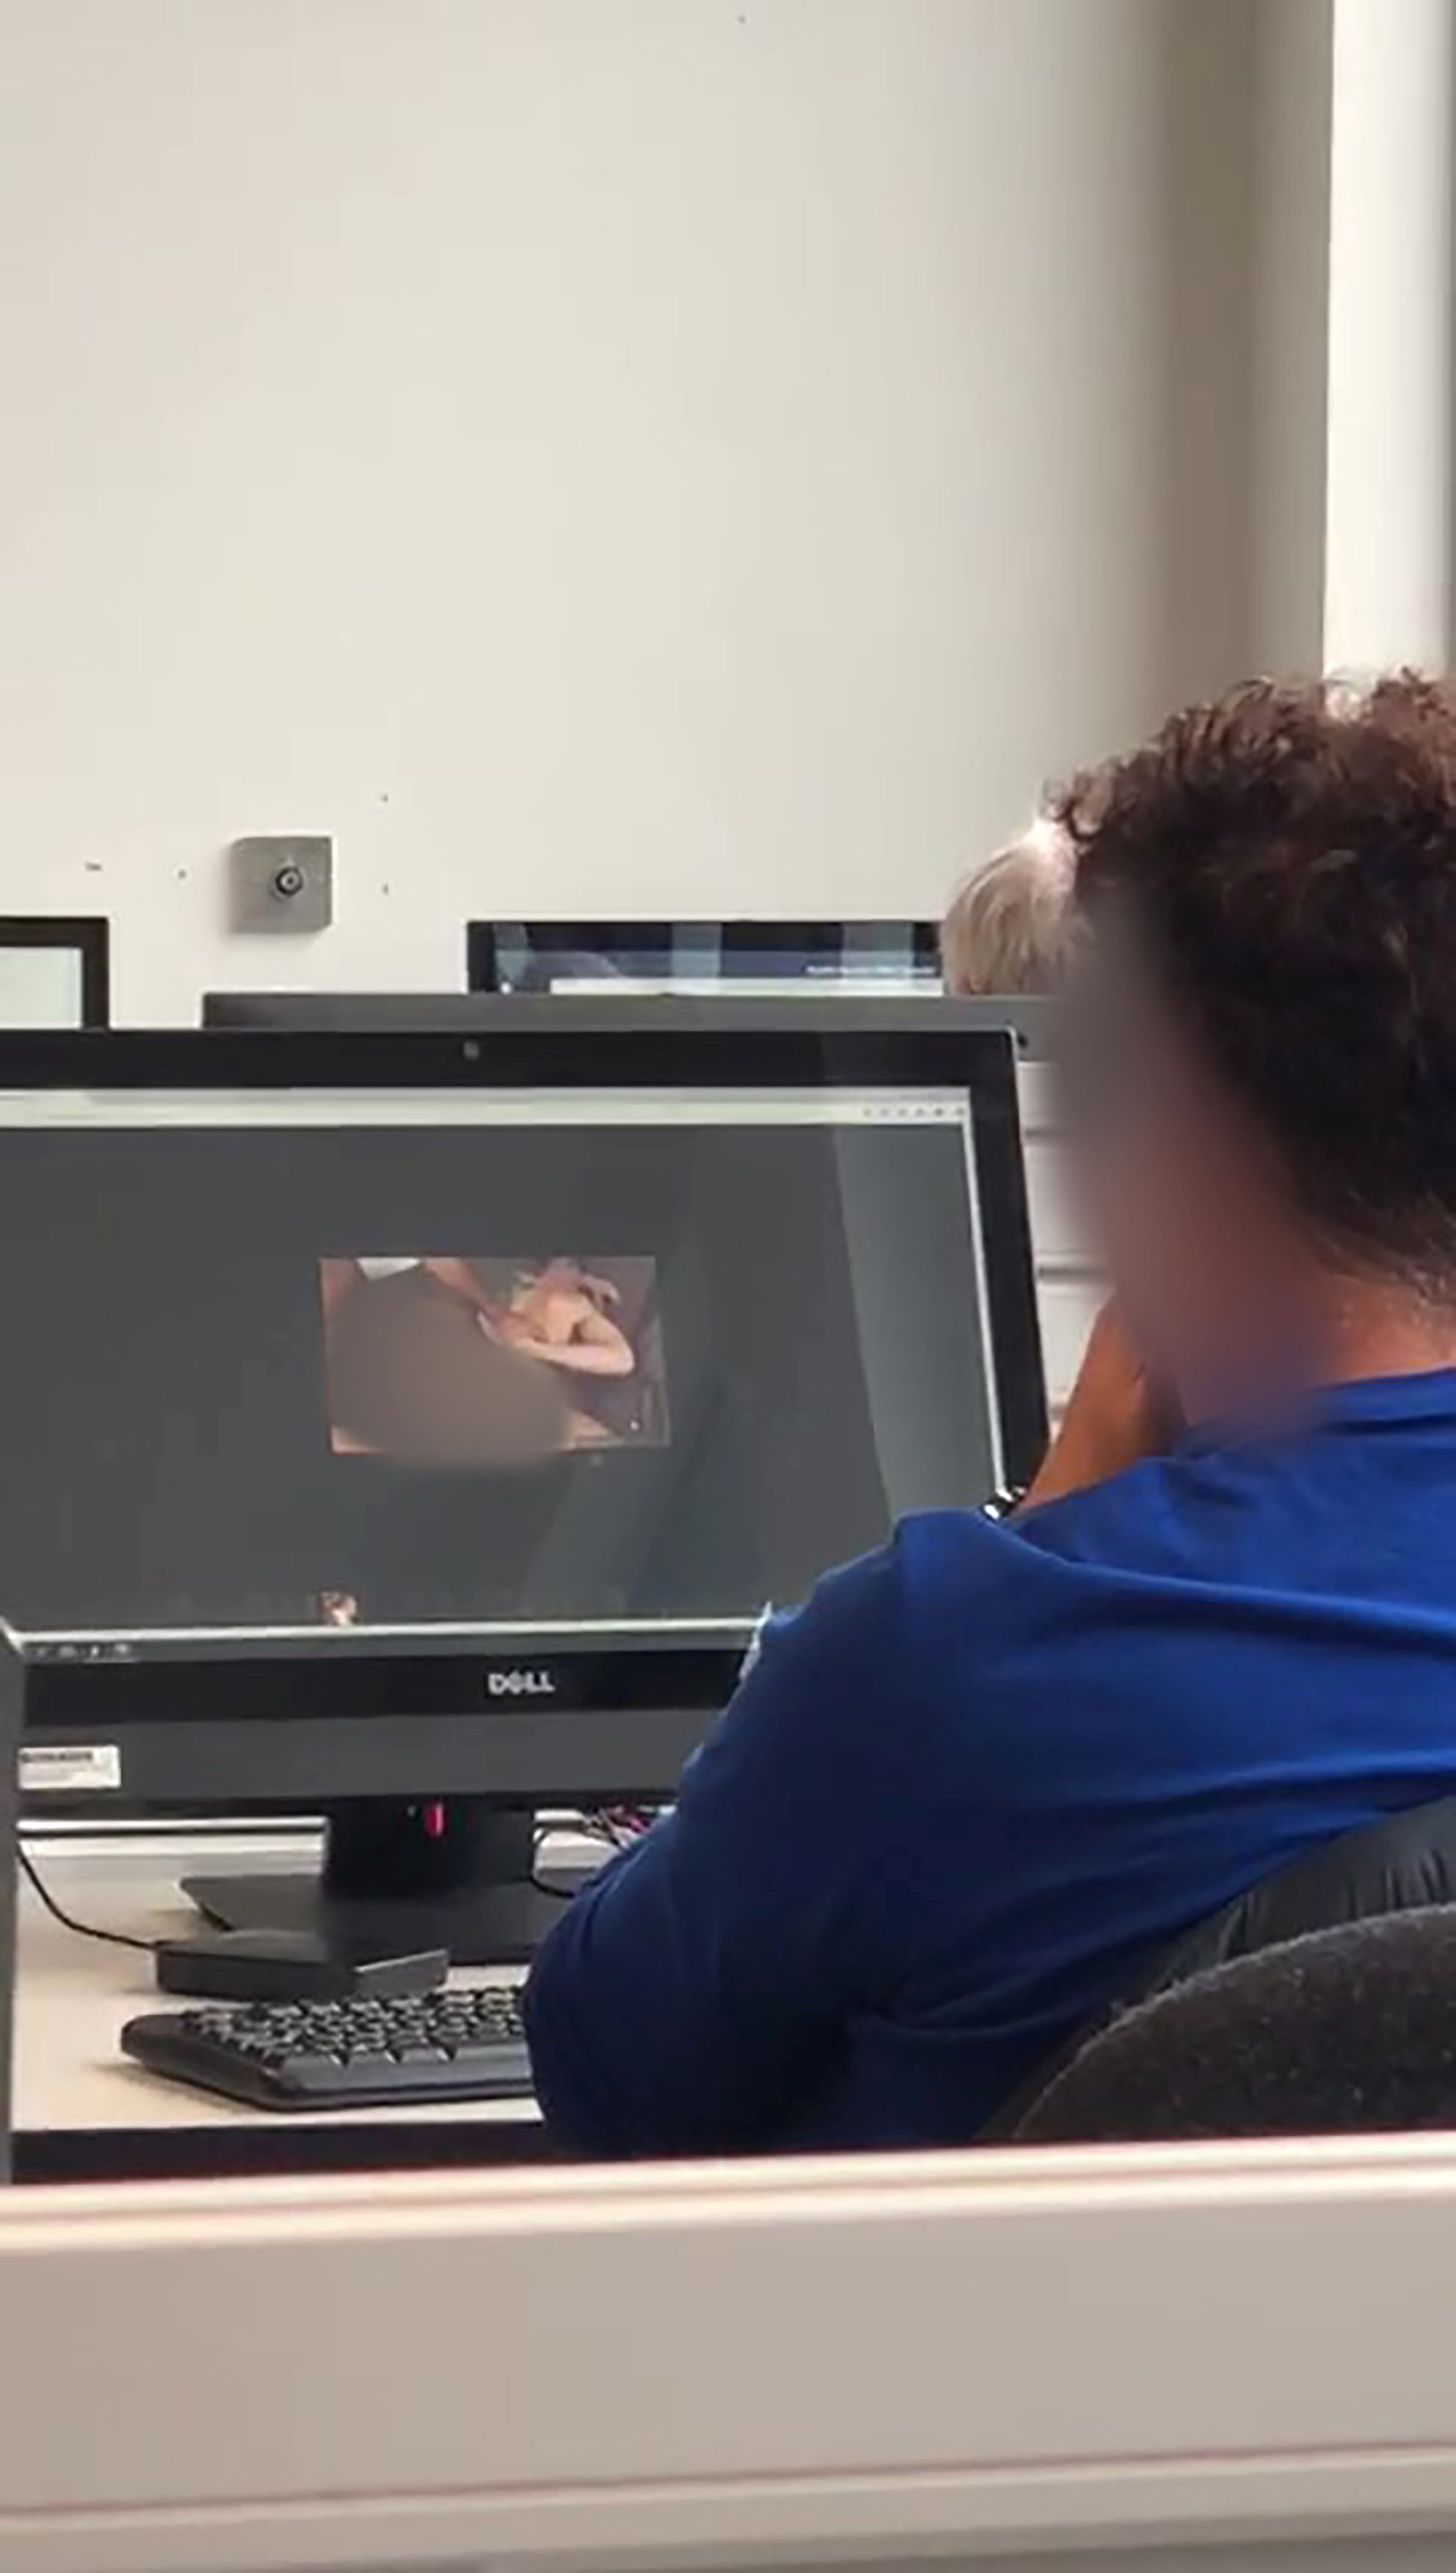 guy caught watching porn